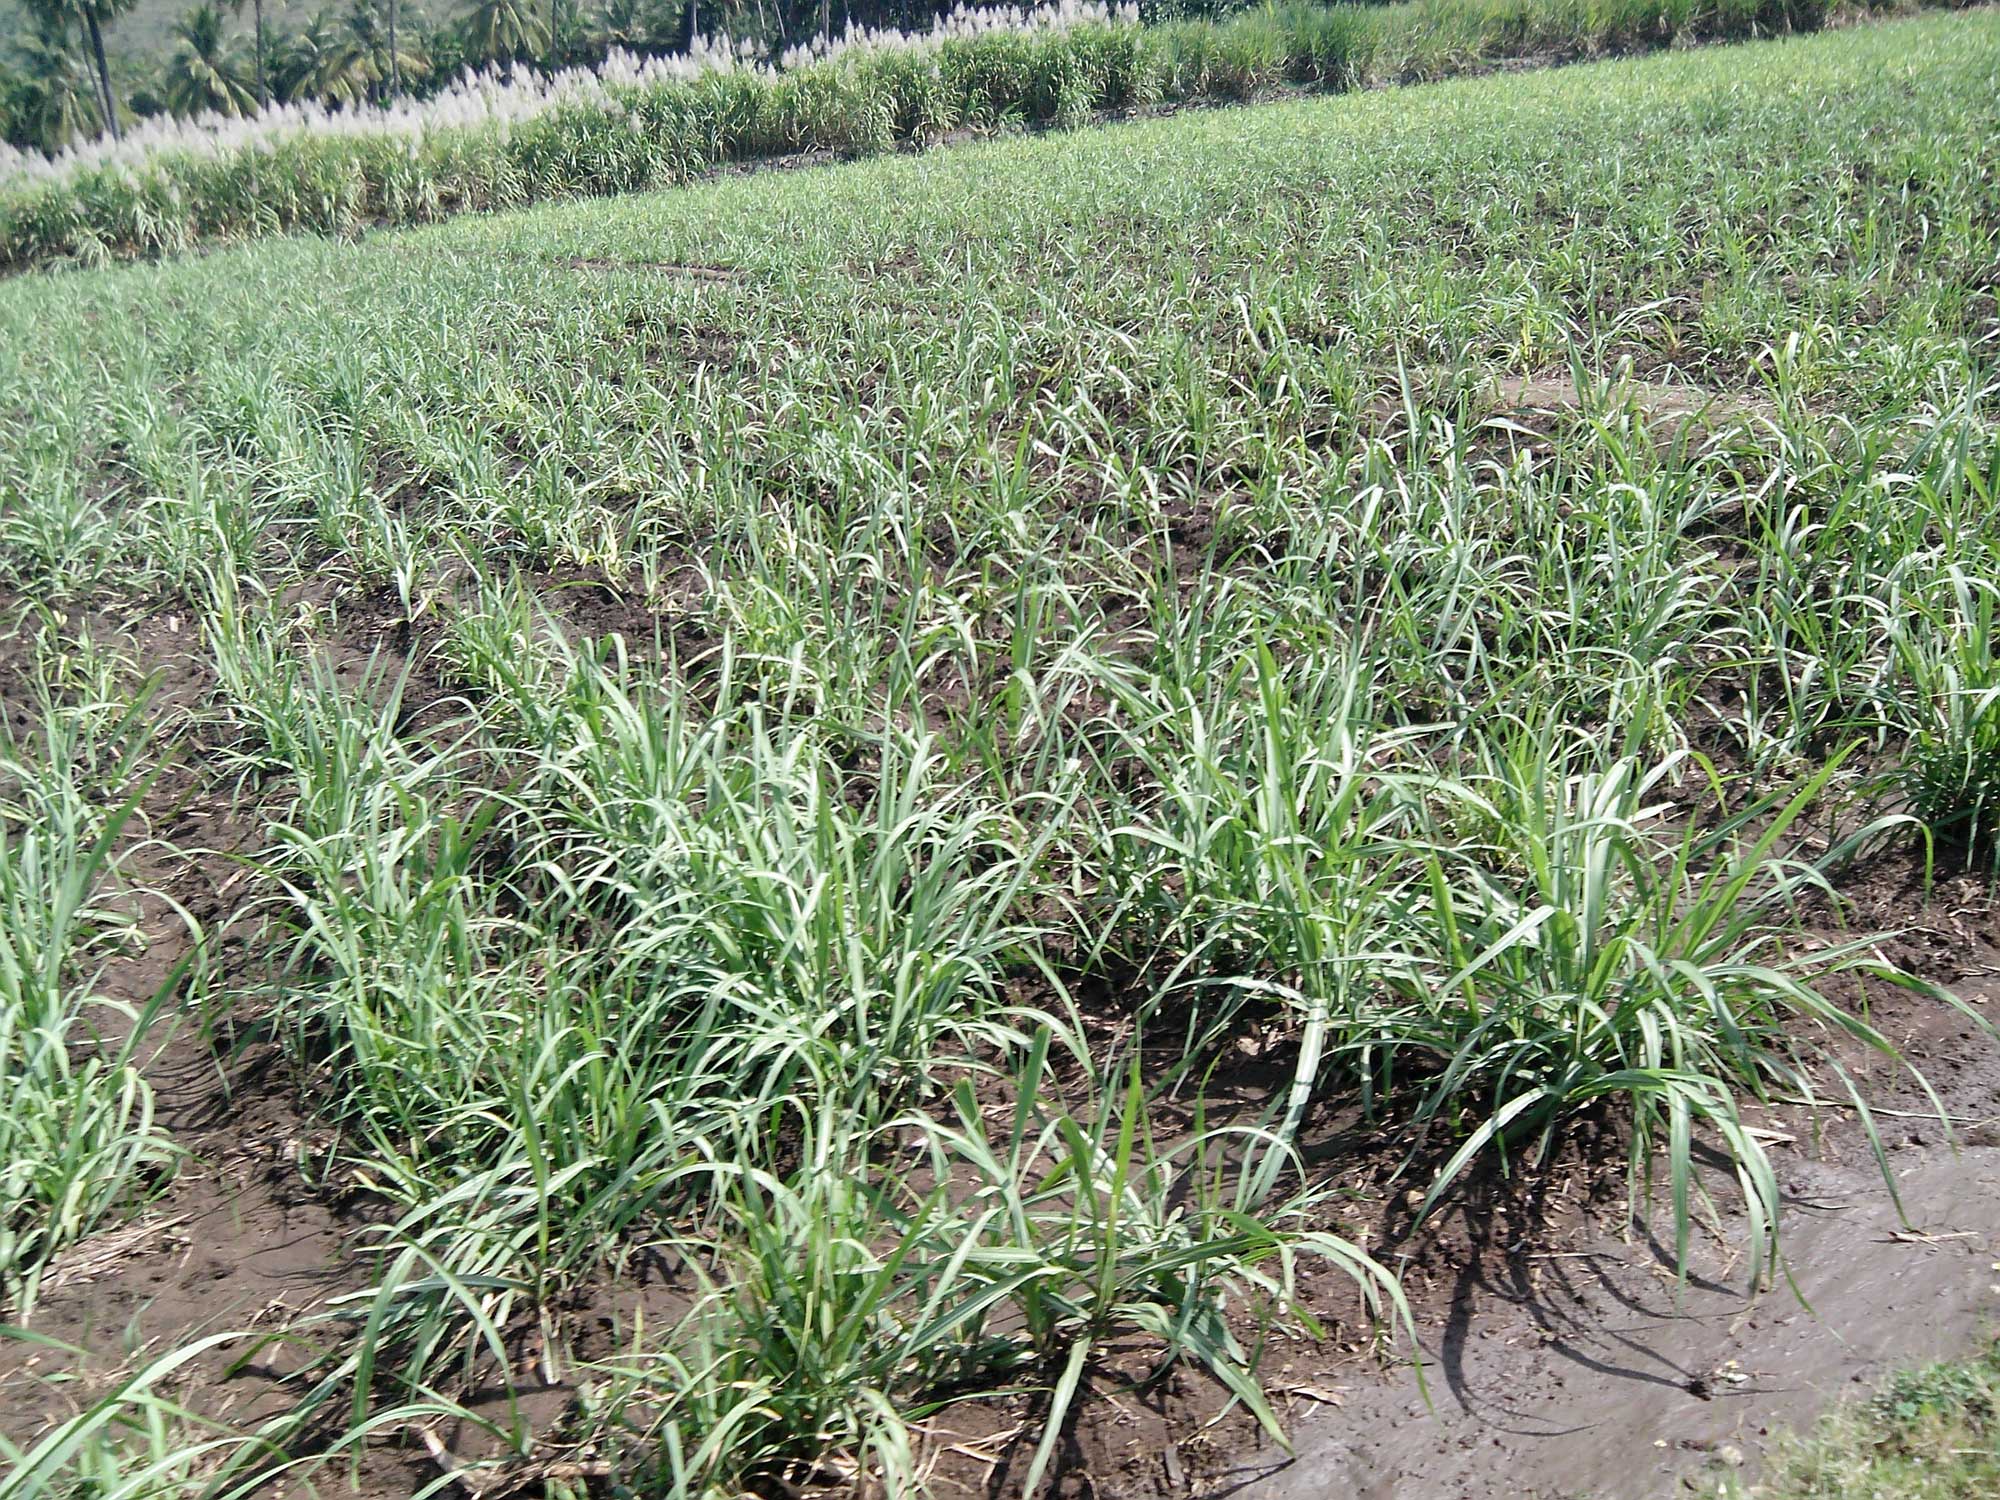 Photograph of a cultivated field with young sugarcane plants. The photo shows a muddy field with rows of young sugarcane plants. The plants look like clumps of elongated grass leaves.